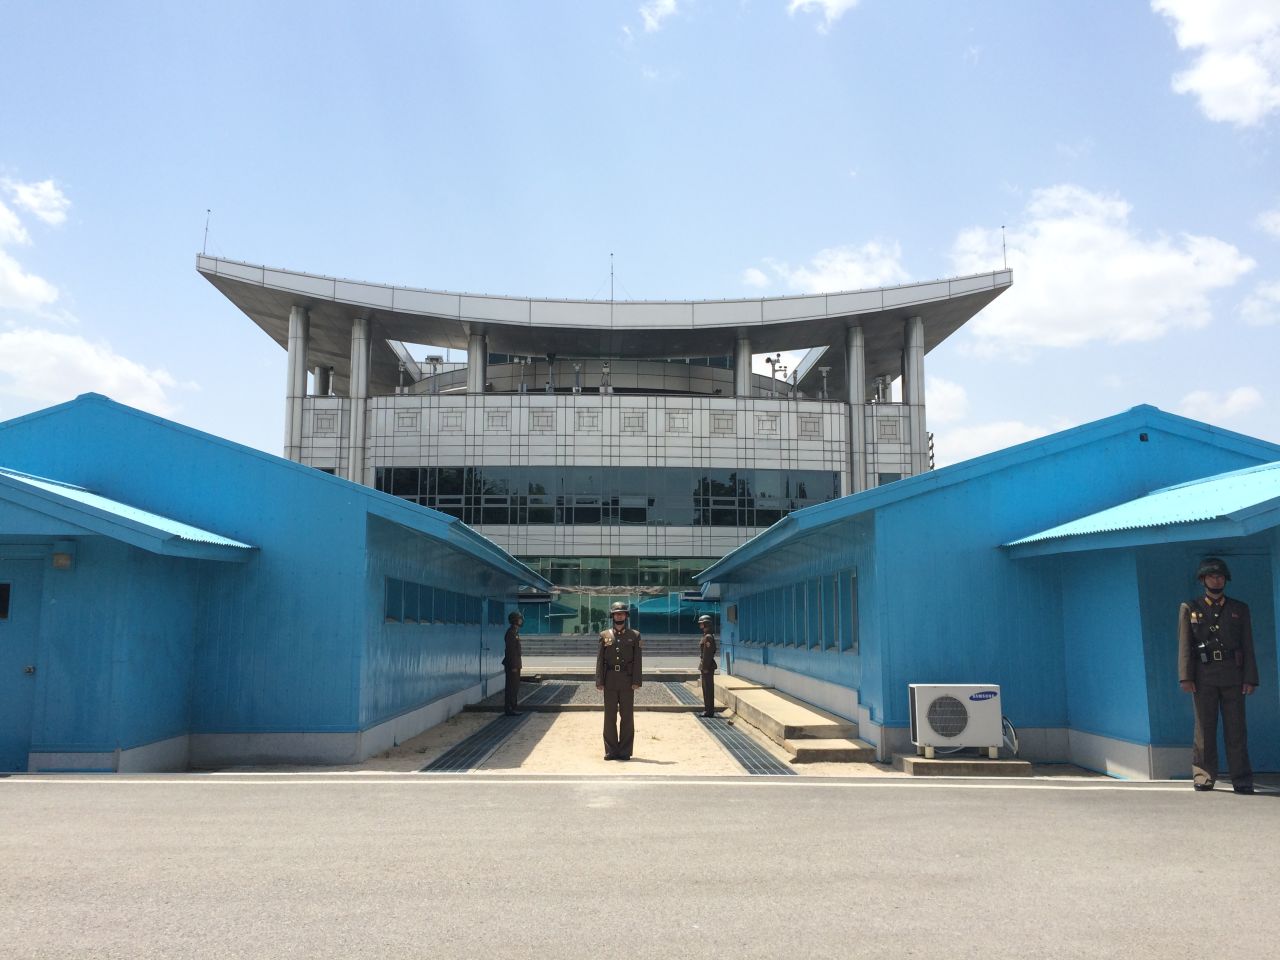 The view from the North Korean side of the DMZ, with armed DPRK soldiers standing guard.